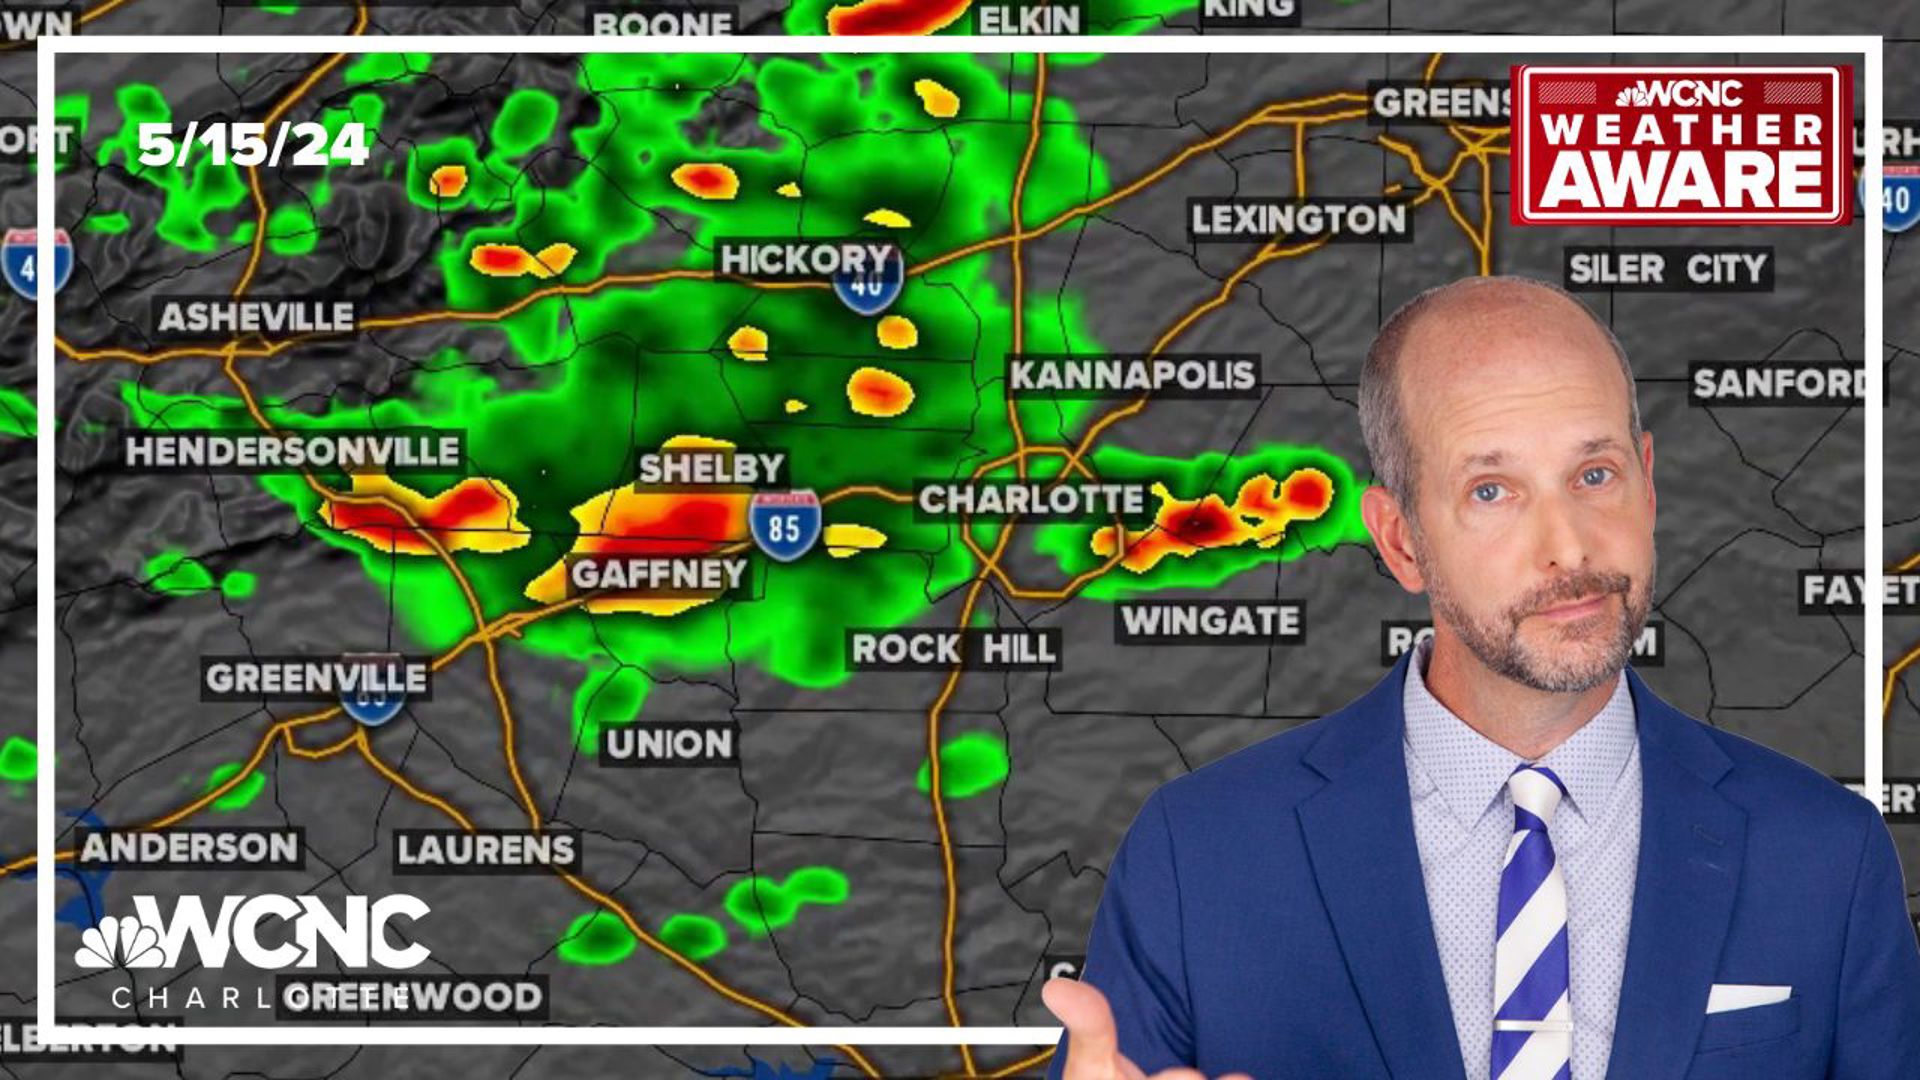 The Charlotte area could see severe weather Wednesday afternoon. Chief Meteorologist breaks down the timing and impacts.